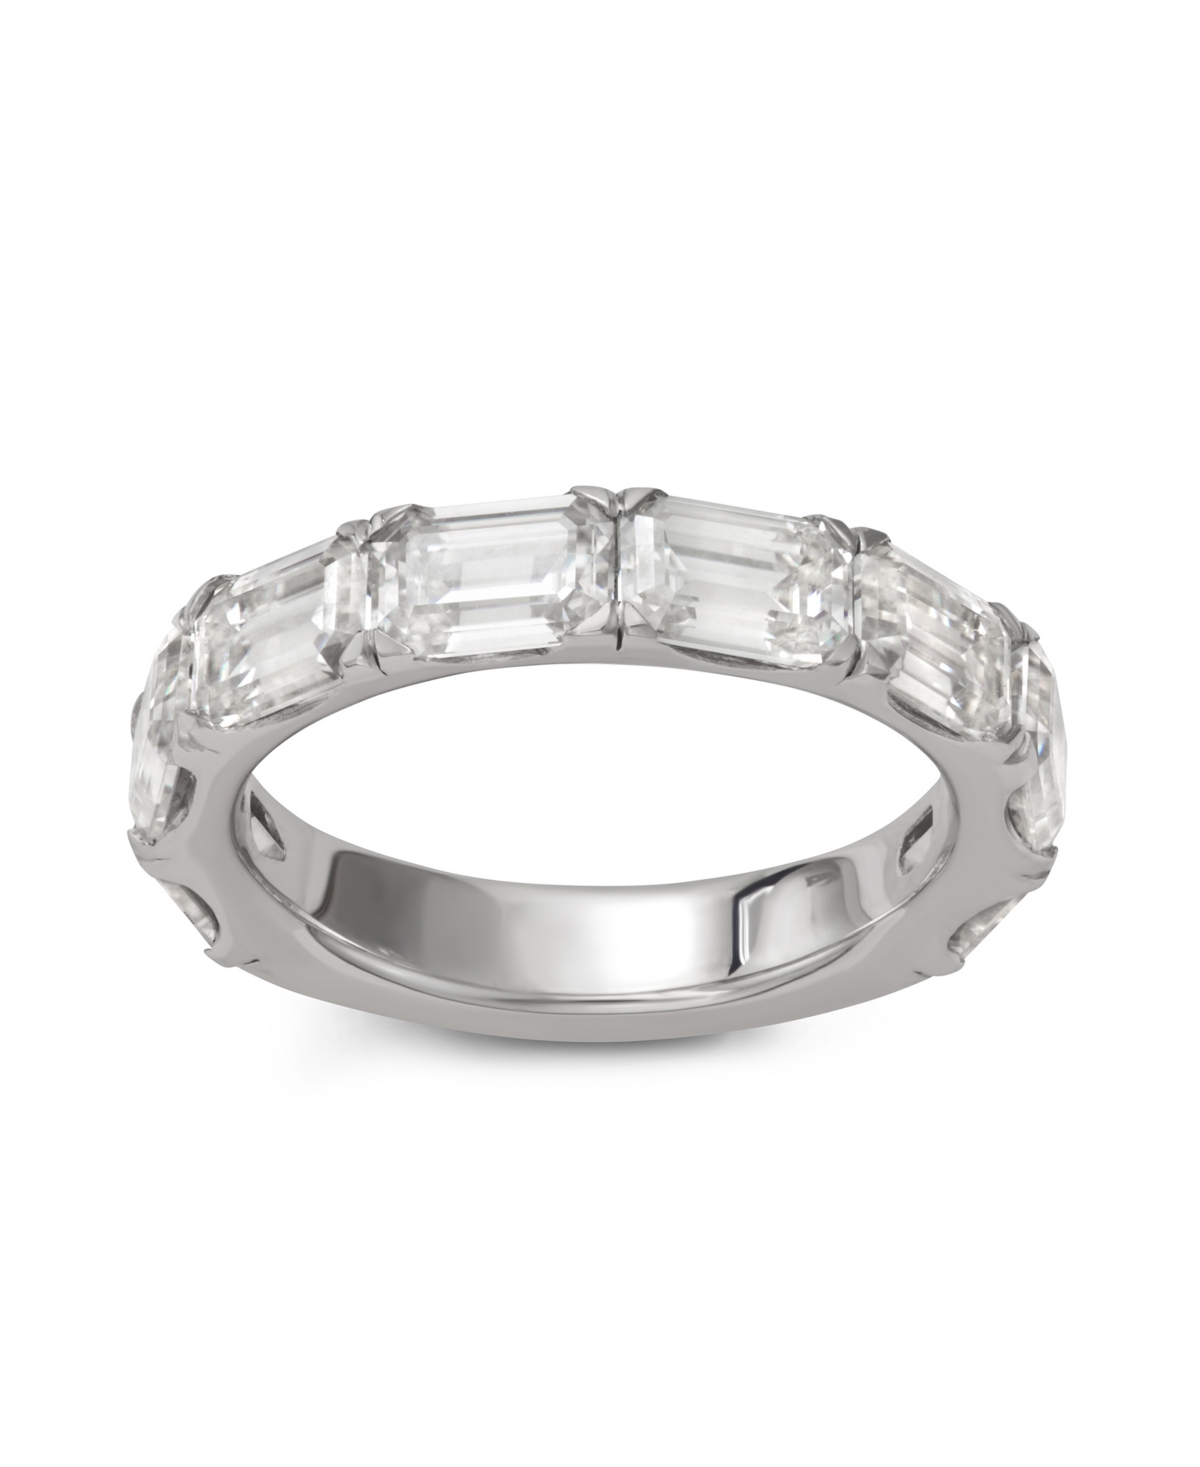 Moissanite Emerald Cut Wedding Band (4 5/8 ct. t.w. Diamond Equivalent) in Sterling Silver - Sterling Silver